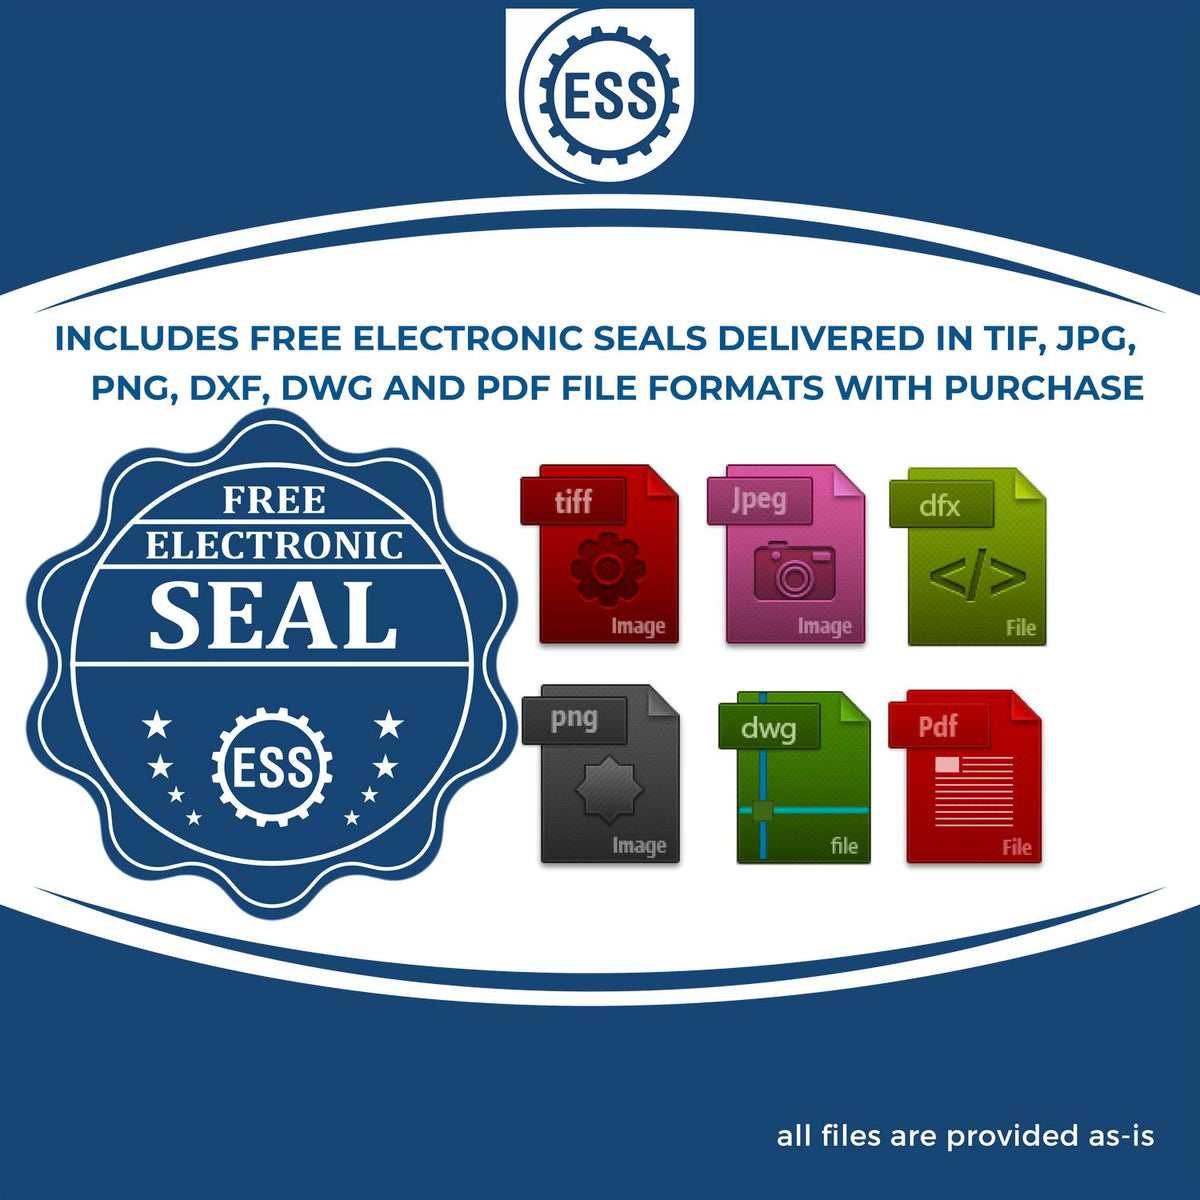 An infographic for the free electronic seal for the Hybrid Rhode Island Architect Seal illustrating the different file type icons such as DXF, DWG, TIF, JPG and PNG.